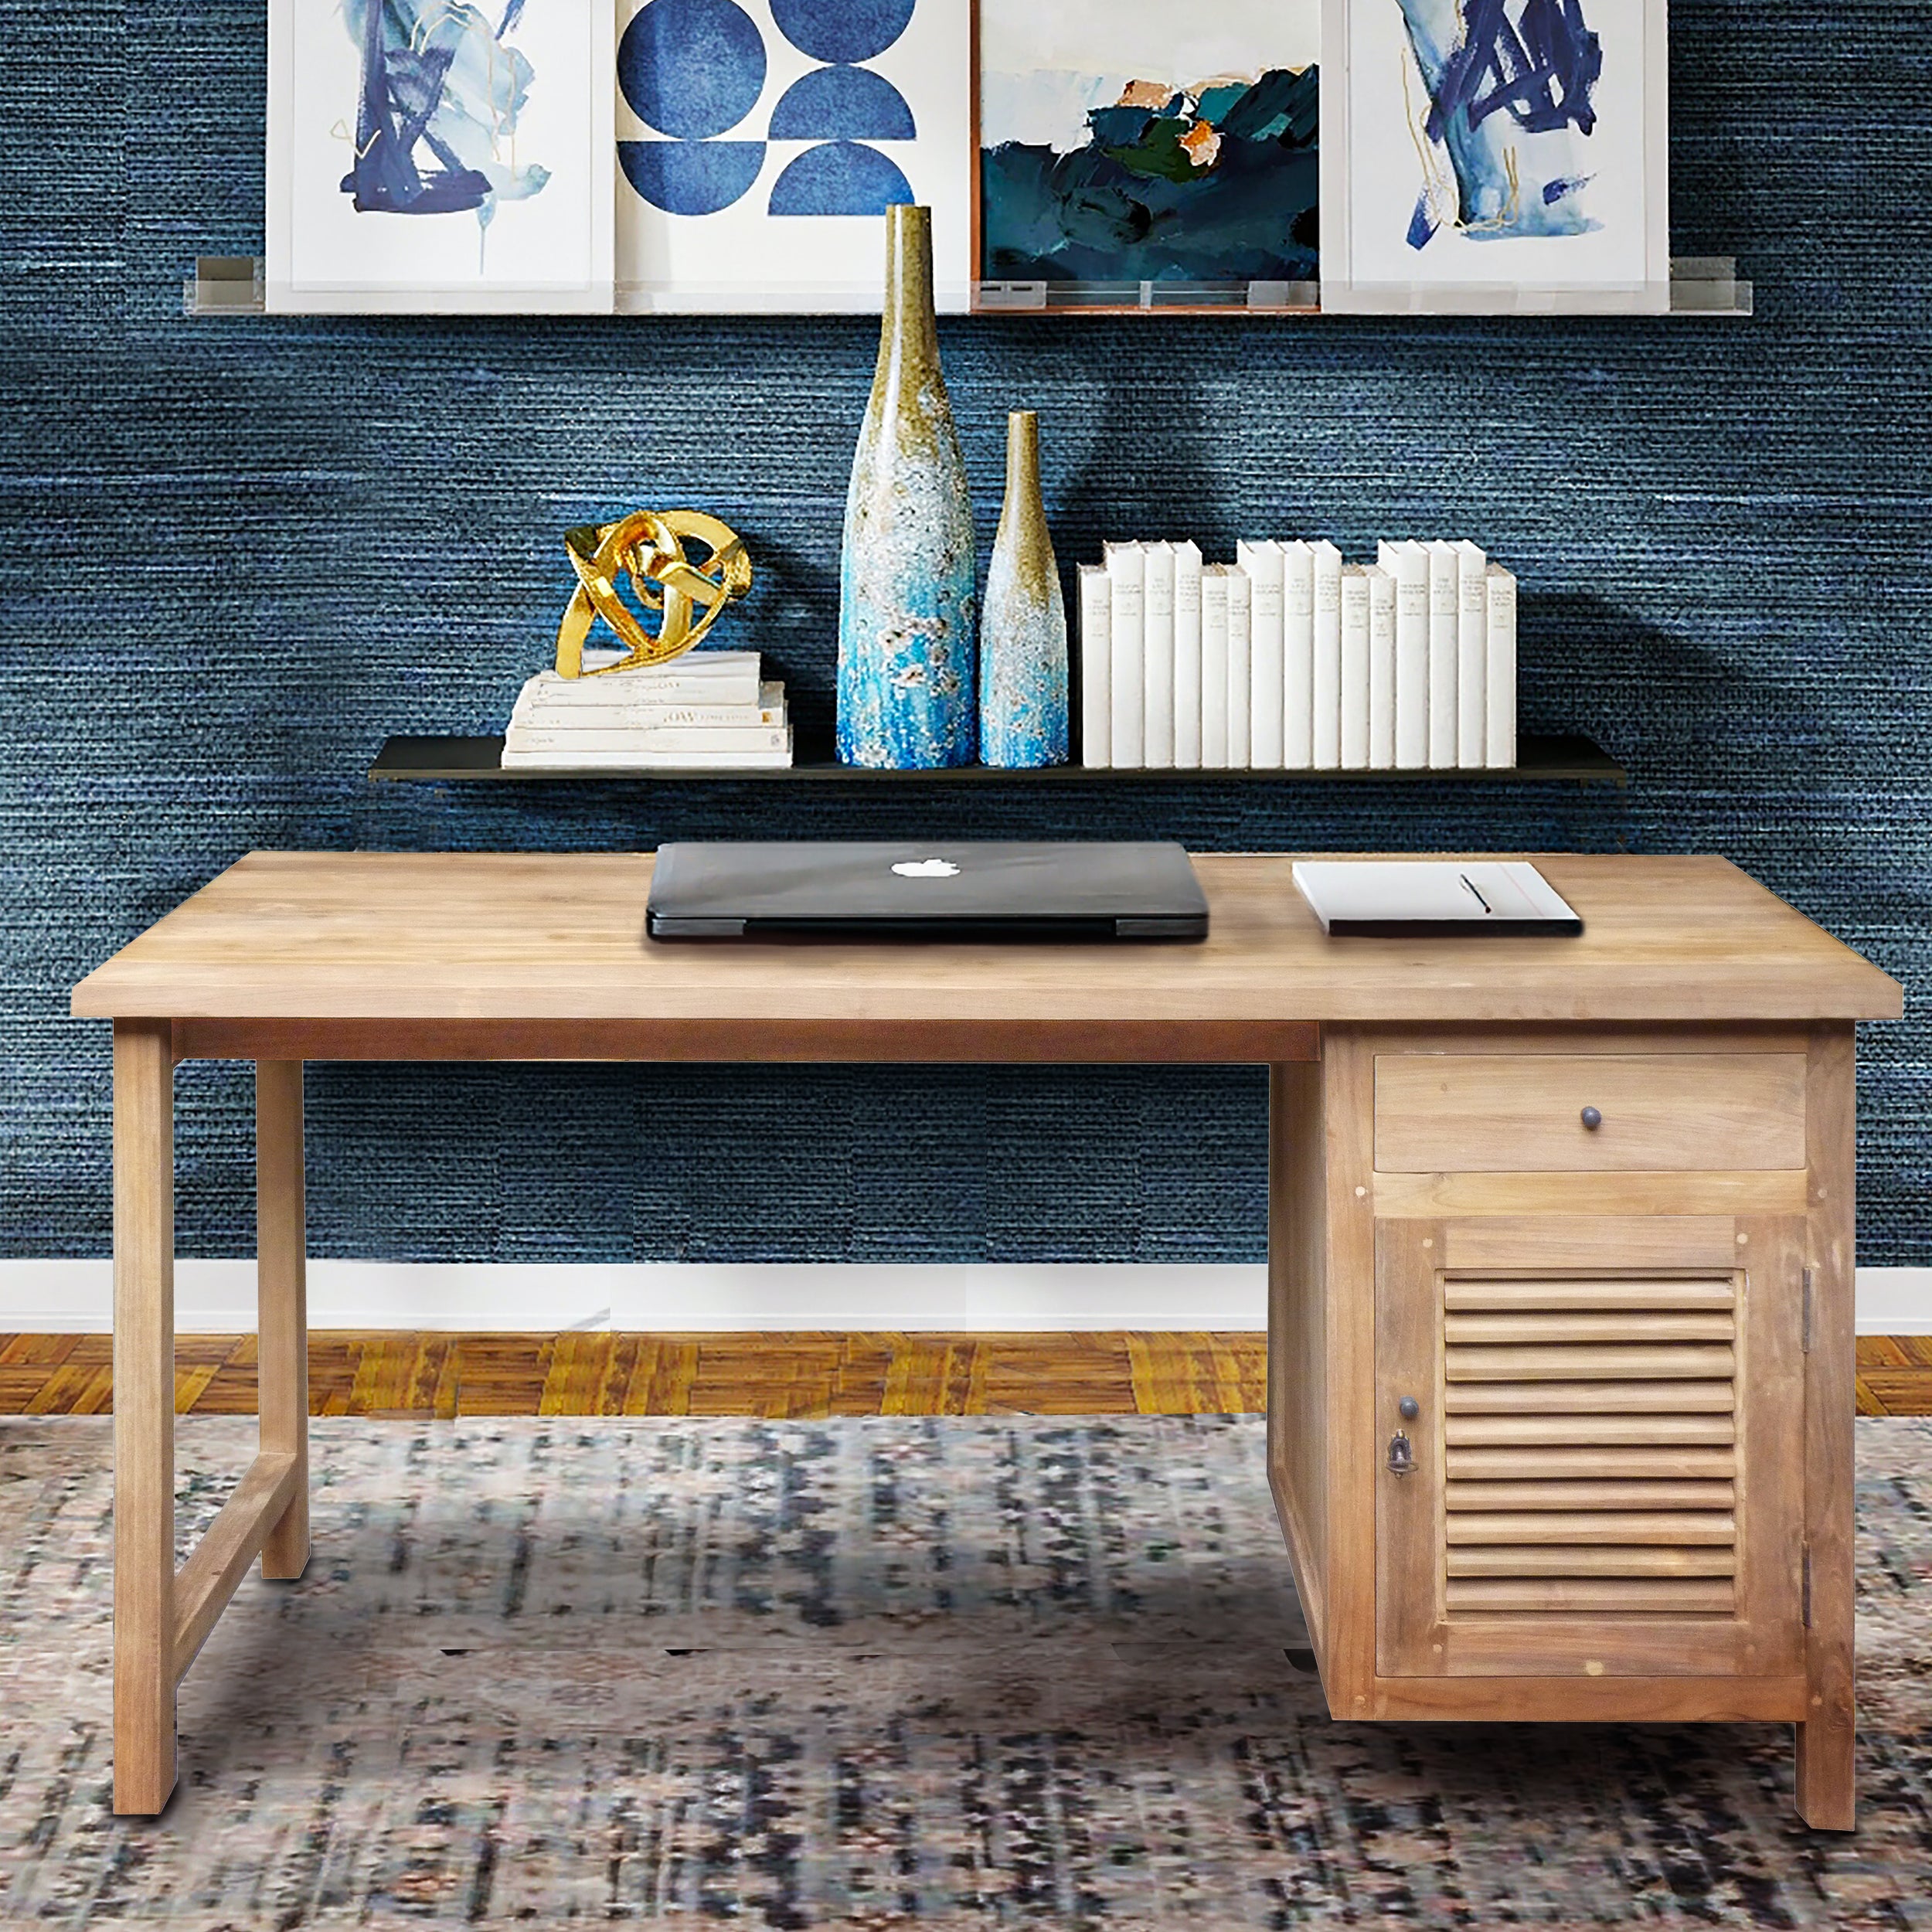 Nordic Computer Desk One Drawer One Shelf Compact Writing 